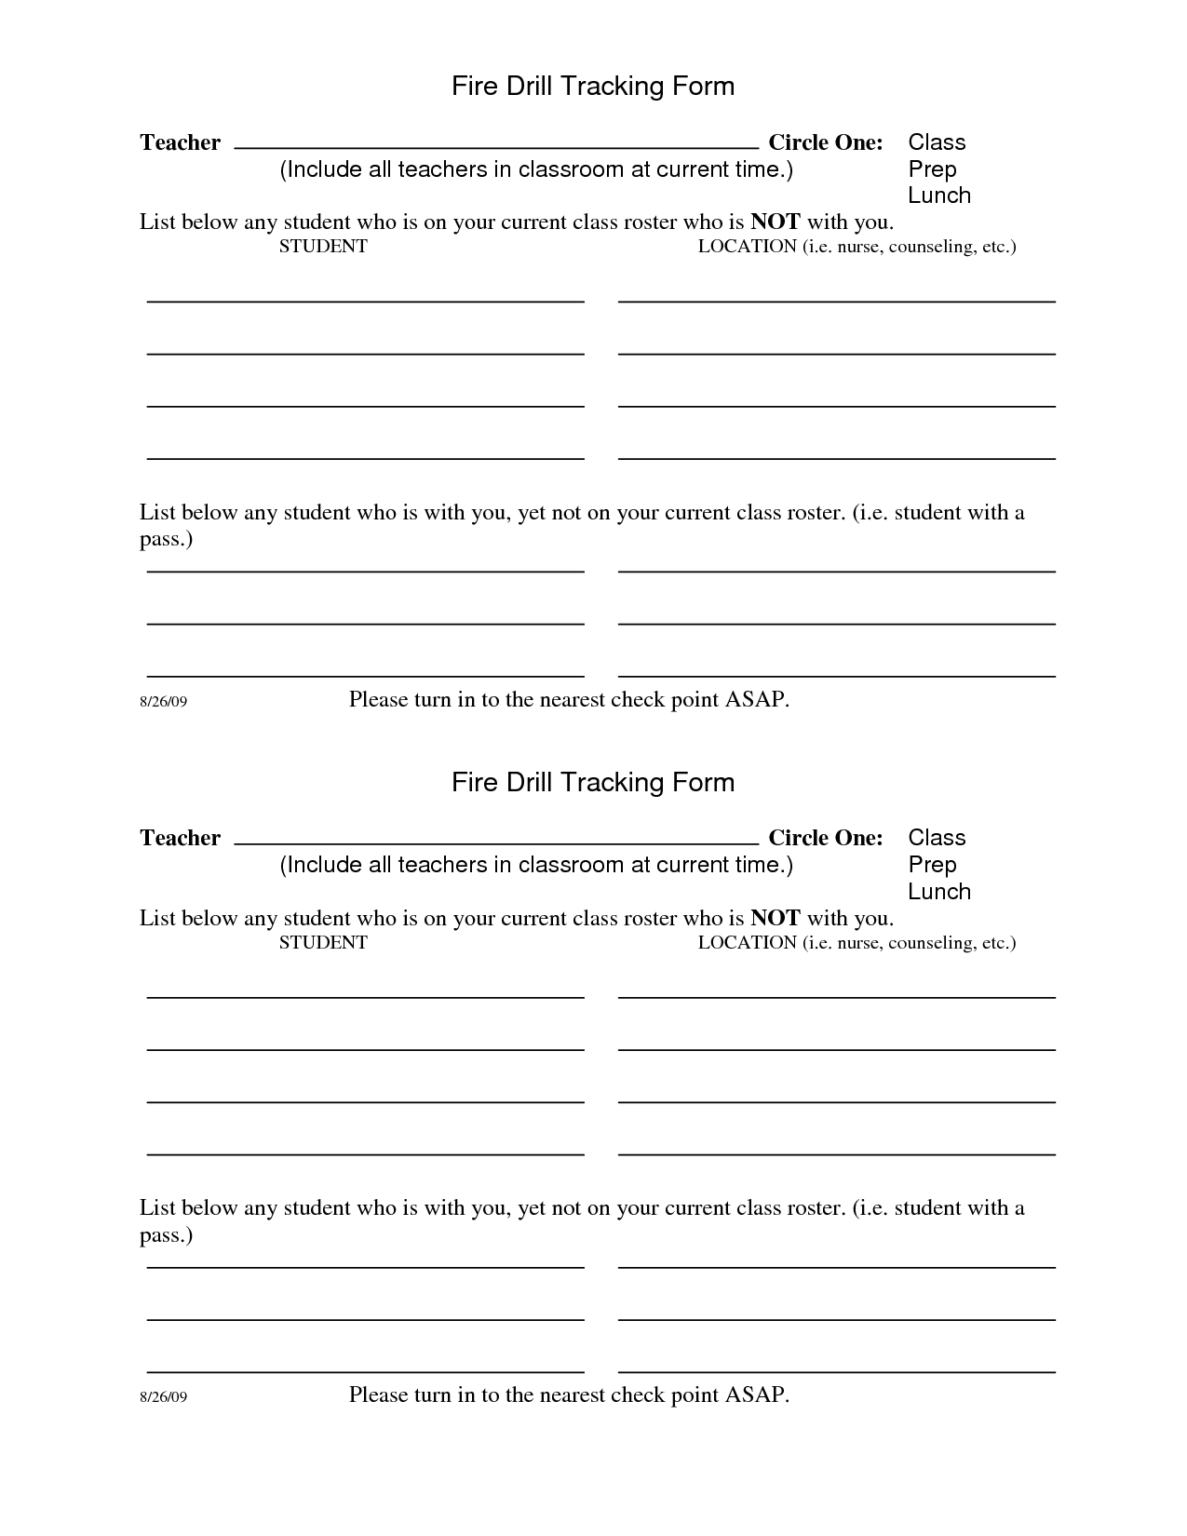 ocfs-fire-drill-log-form-fill-out-and-sign-printable-pdf-template